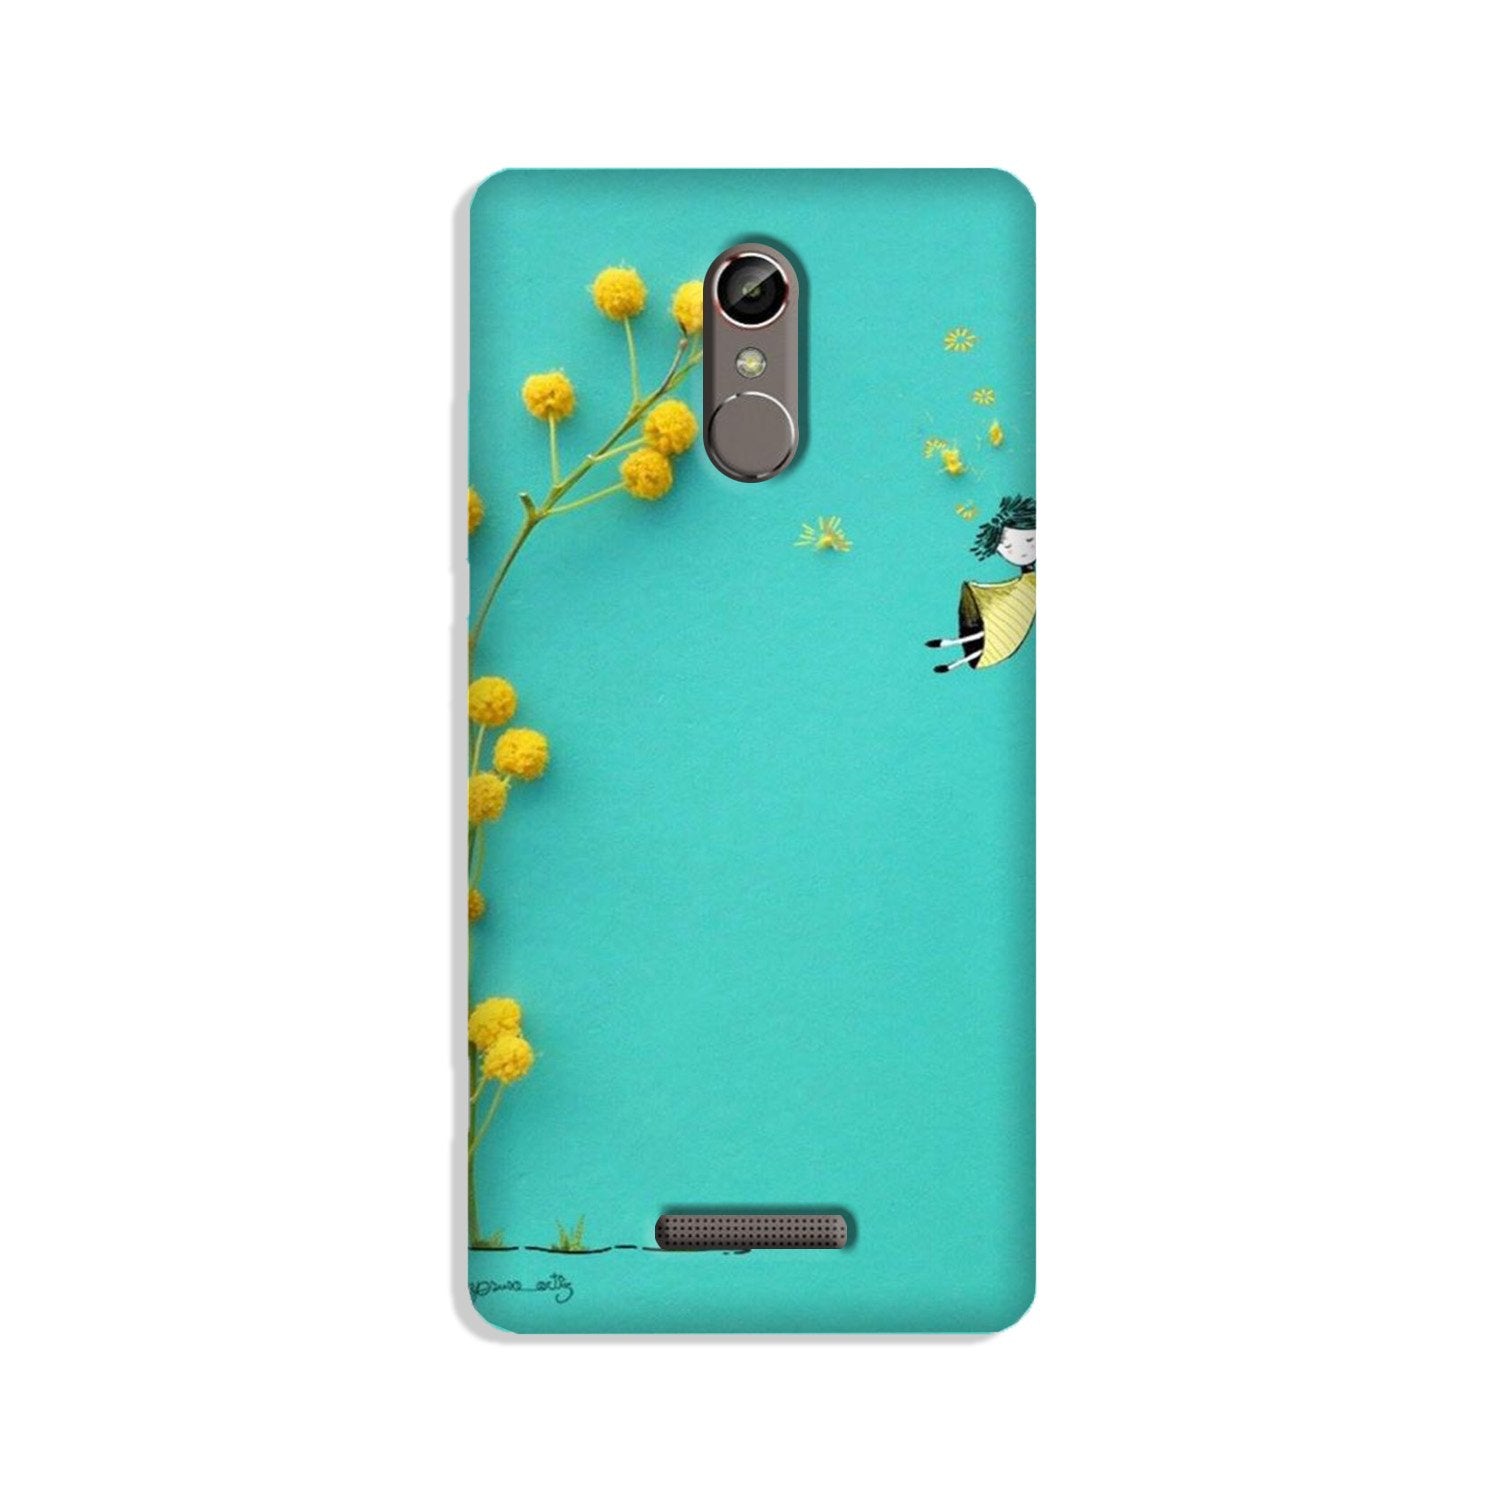 Flowers Girl Case for Gionee S6s (Design No. 216)